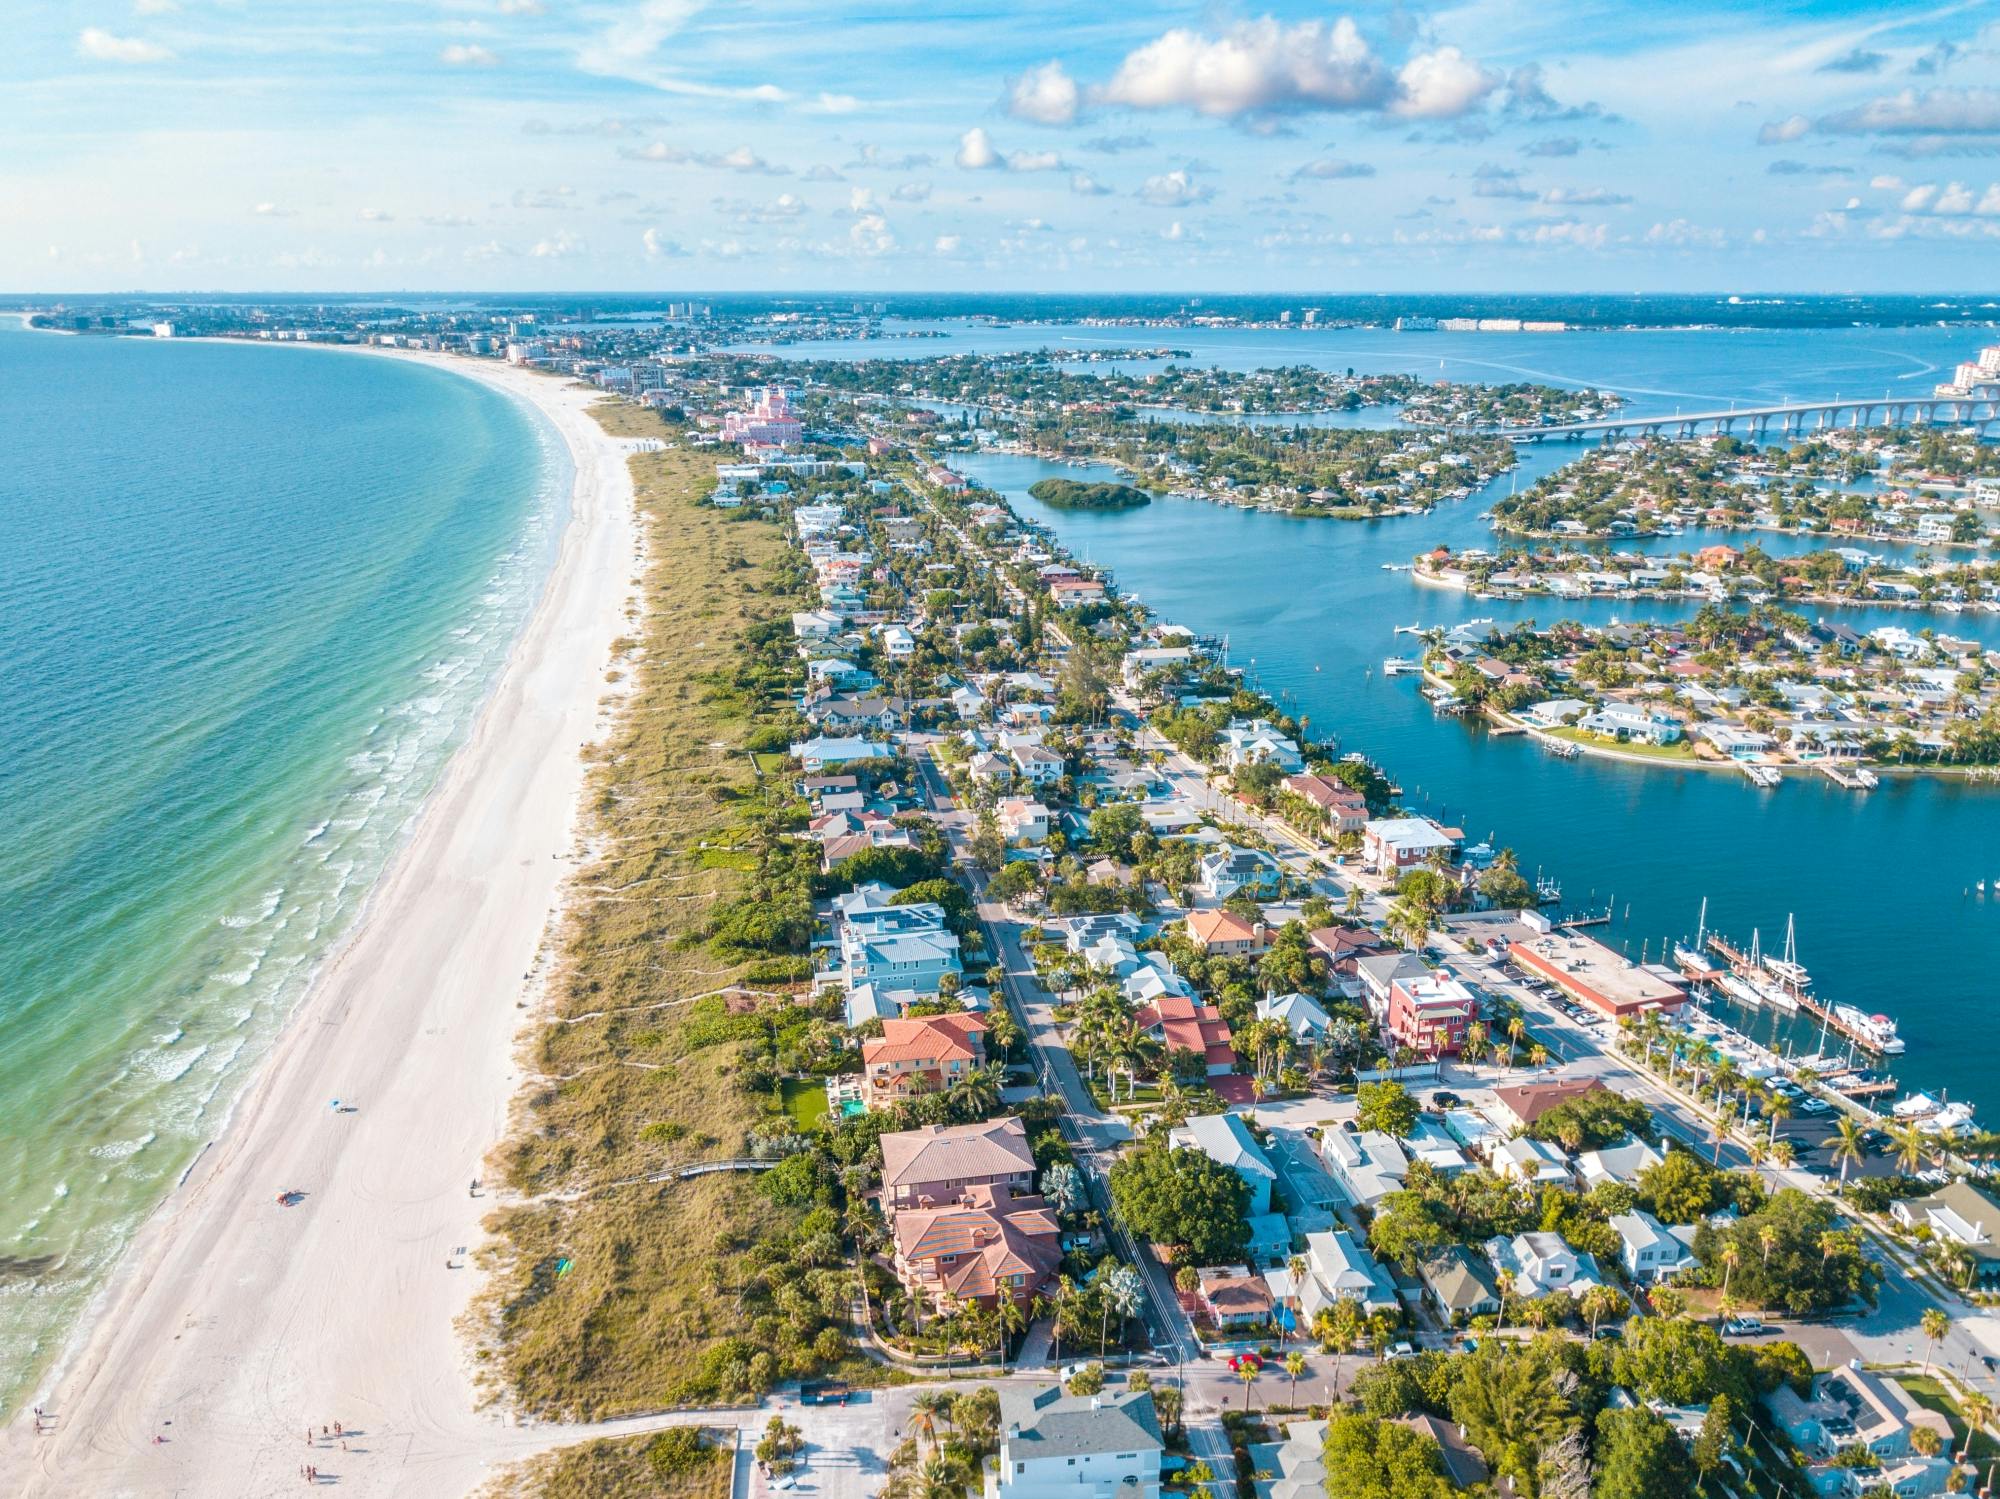 What to see and do in St. Petersburg, Florida Attractions, tours, and